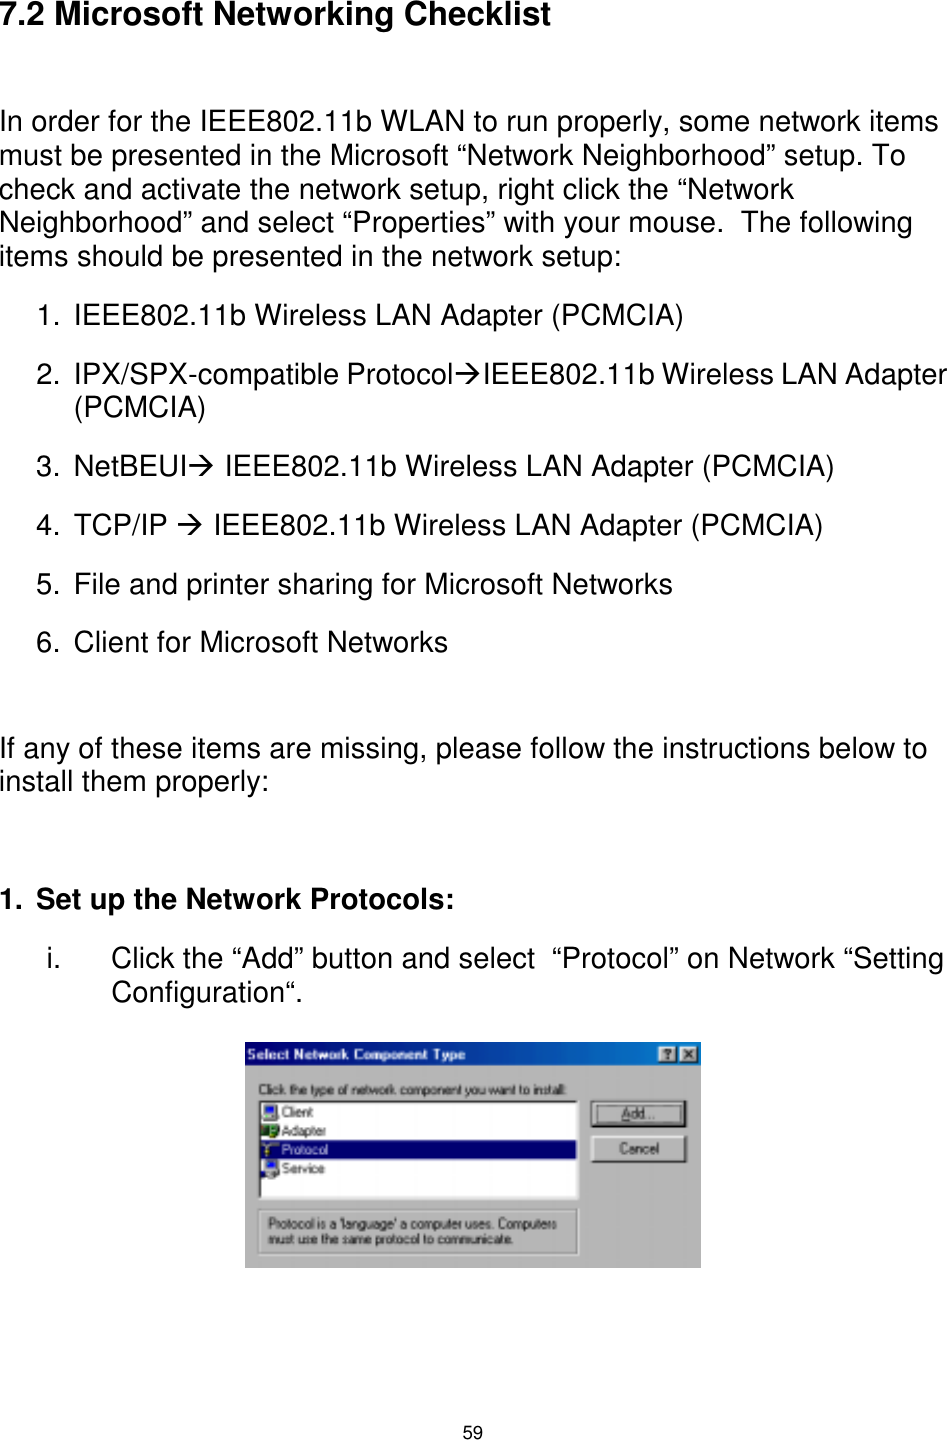  59  7.2 Microsoft Networking Checklist  In order for the IEEE802.11b WLAN to run properly, some network items must be presented in the Microsoft “Network Neighborhood” setup. To check and activate the network setup, right click the “Network Neighborhood” and select “Properties” with your mouse.  The following items should be presented in the network setup:  1.  IEEE802.11b Wireless LAN Adapter (PCMCIA) 2. IPX/SPX-compatible Protocol#IEEE802.11b Wireless LAN Adapter (PCMCIA) 3. NetBEUI# IEEE802.11b Wireless LAN Adapter (PCMCIA) 4. TCP/IP # IEEE802.11b Wireless LAN Adapter (PCMCIA) 5.  File and printer sharing for Microsoft Networks 6.  Client for Microsoft Networks  If any of these items are missing, please follow the instructions below to install them properly:  1.  Set up the Network Protocols: i.  Click the “Add” button and select  “Protocol” on Network “Setting Configuration“.        